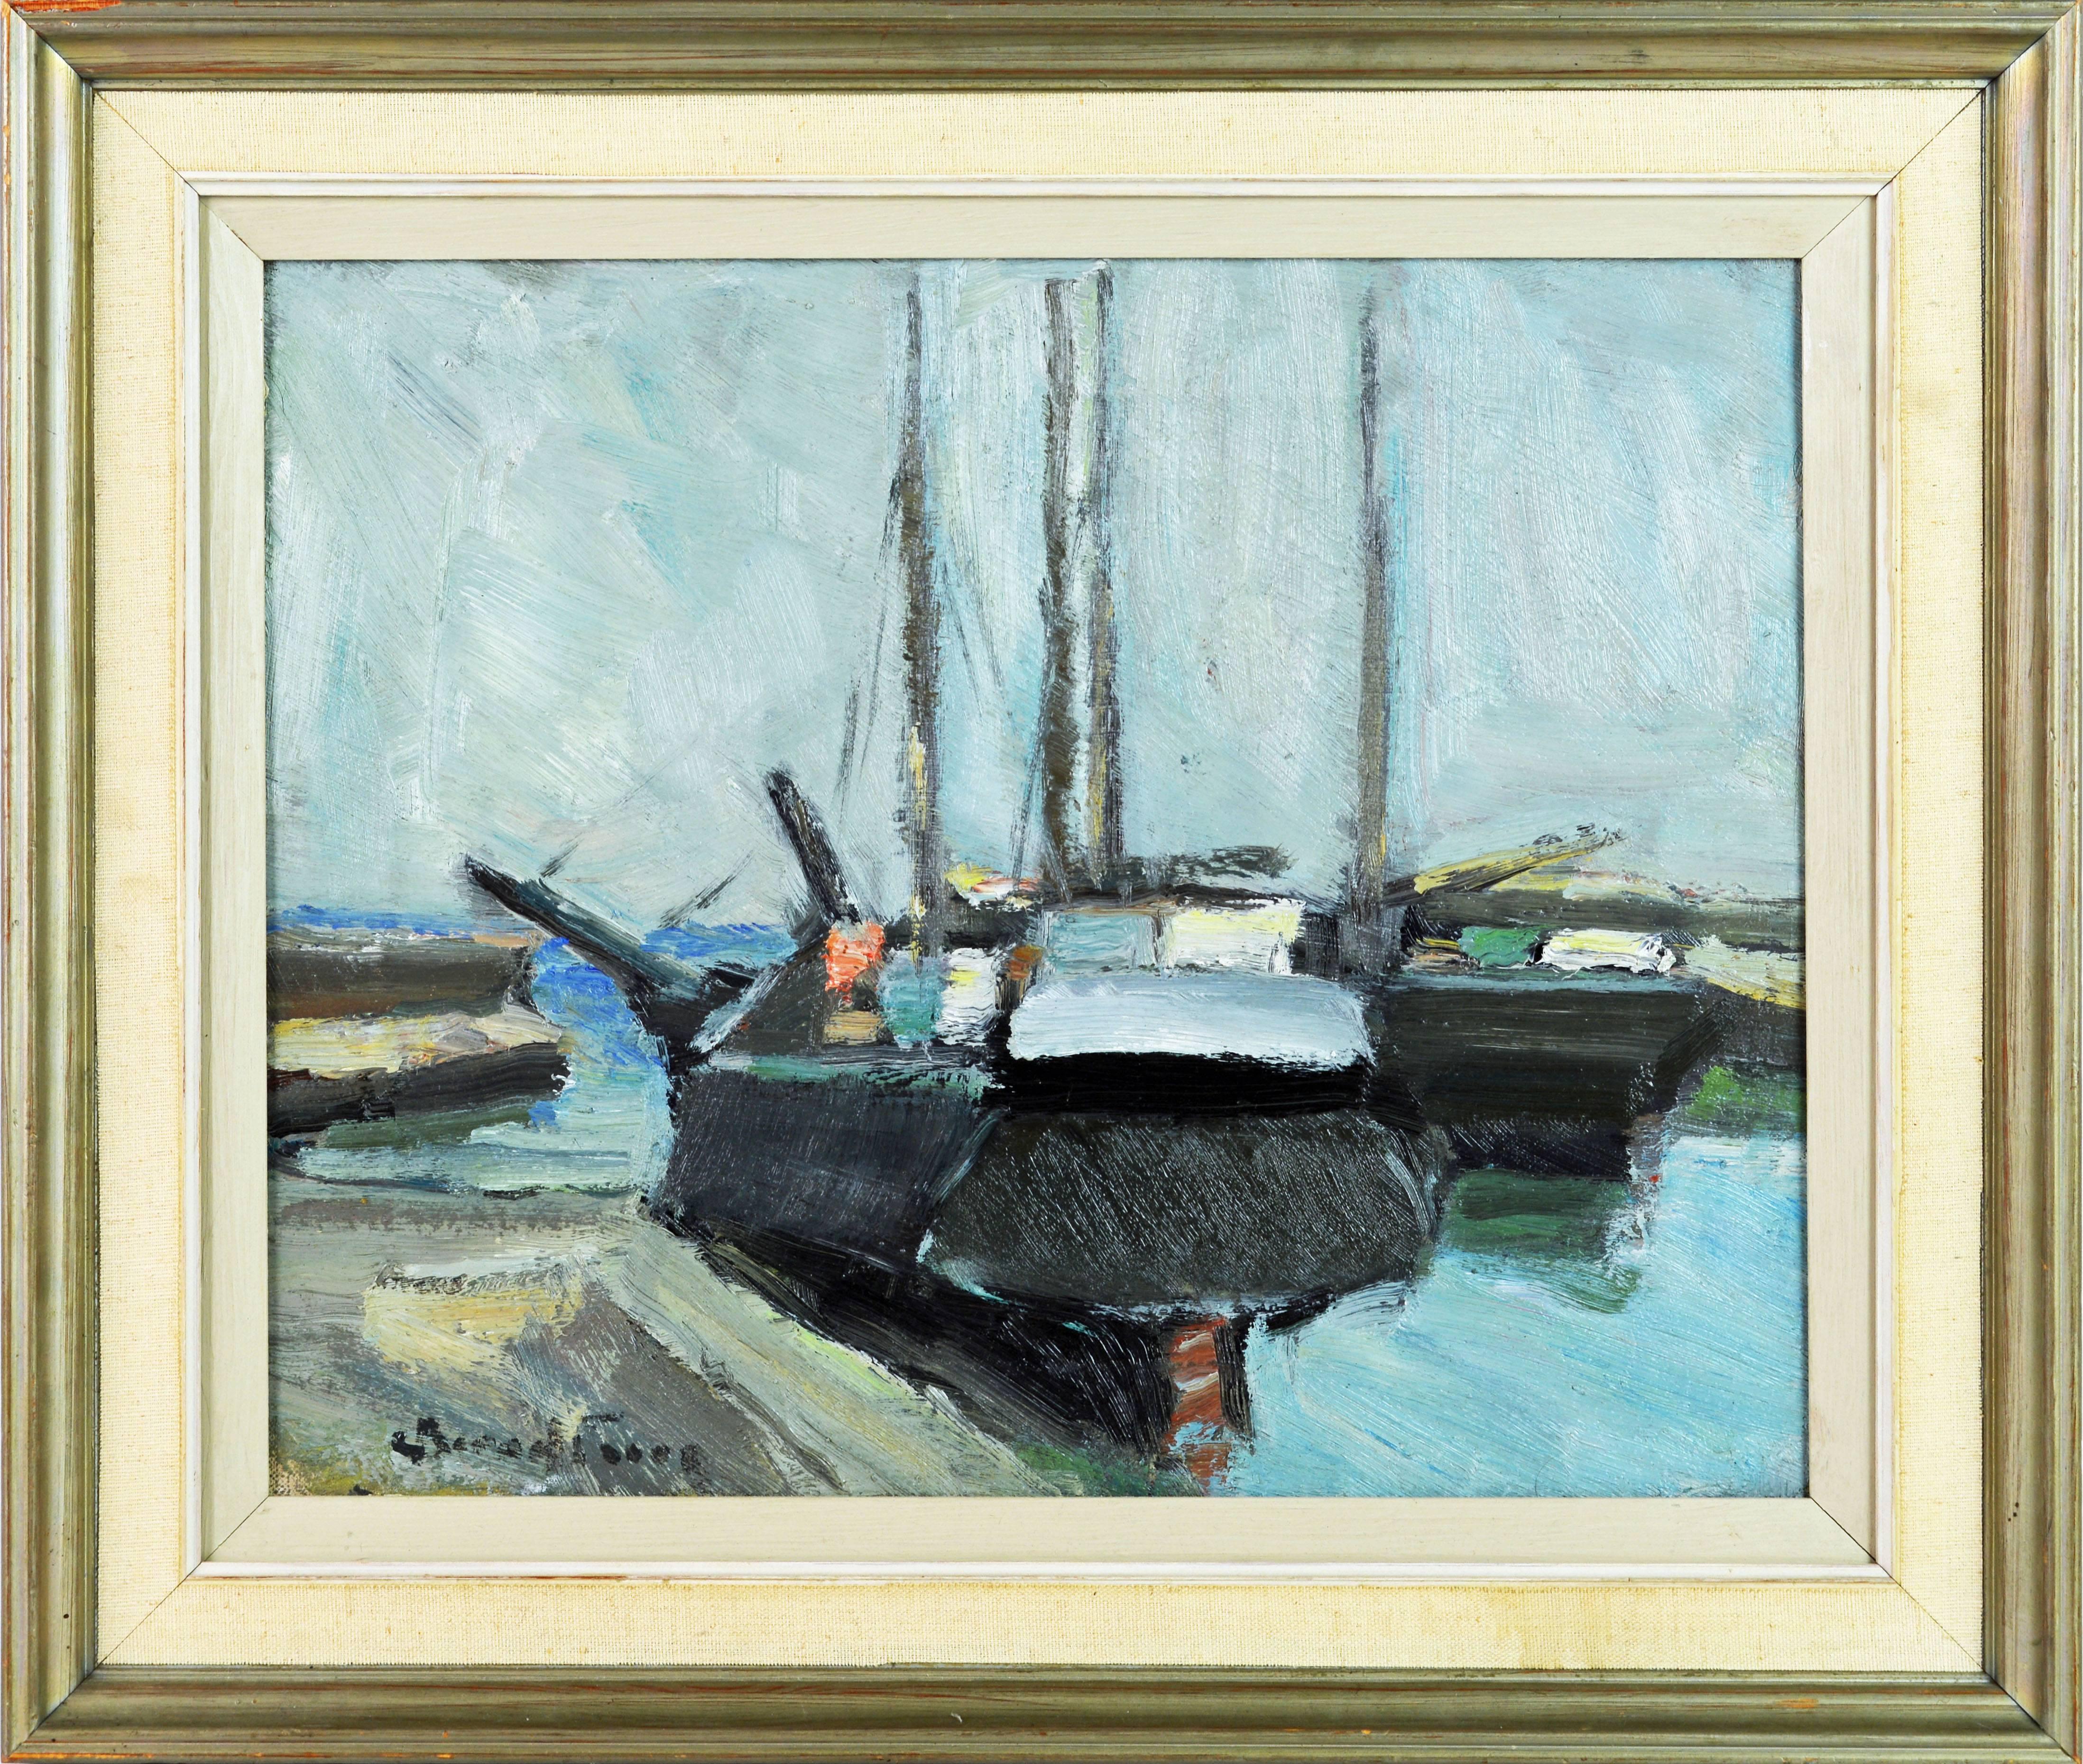 'The Old Boats in Harbor'
By Carl Berndtsson, Swedish, 1902-1982.
Measures: 13 x 16 inches without frame, 18 x 21 in. including frame.
Oil on canvas, signed.
Housed in the likely original painted frame with liner.

Carl Berndtson:
Carl